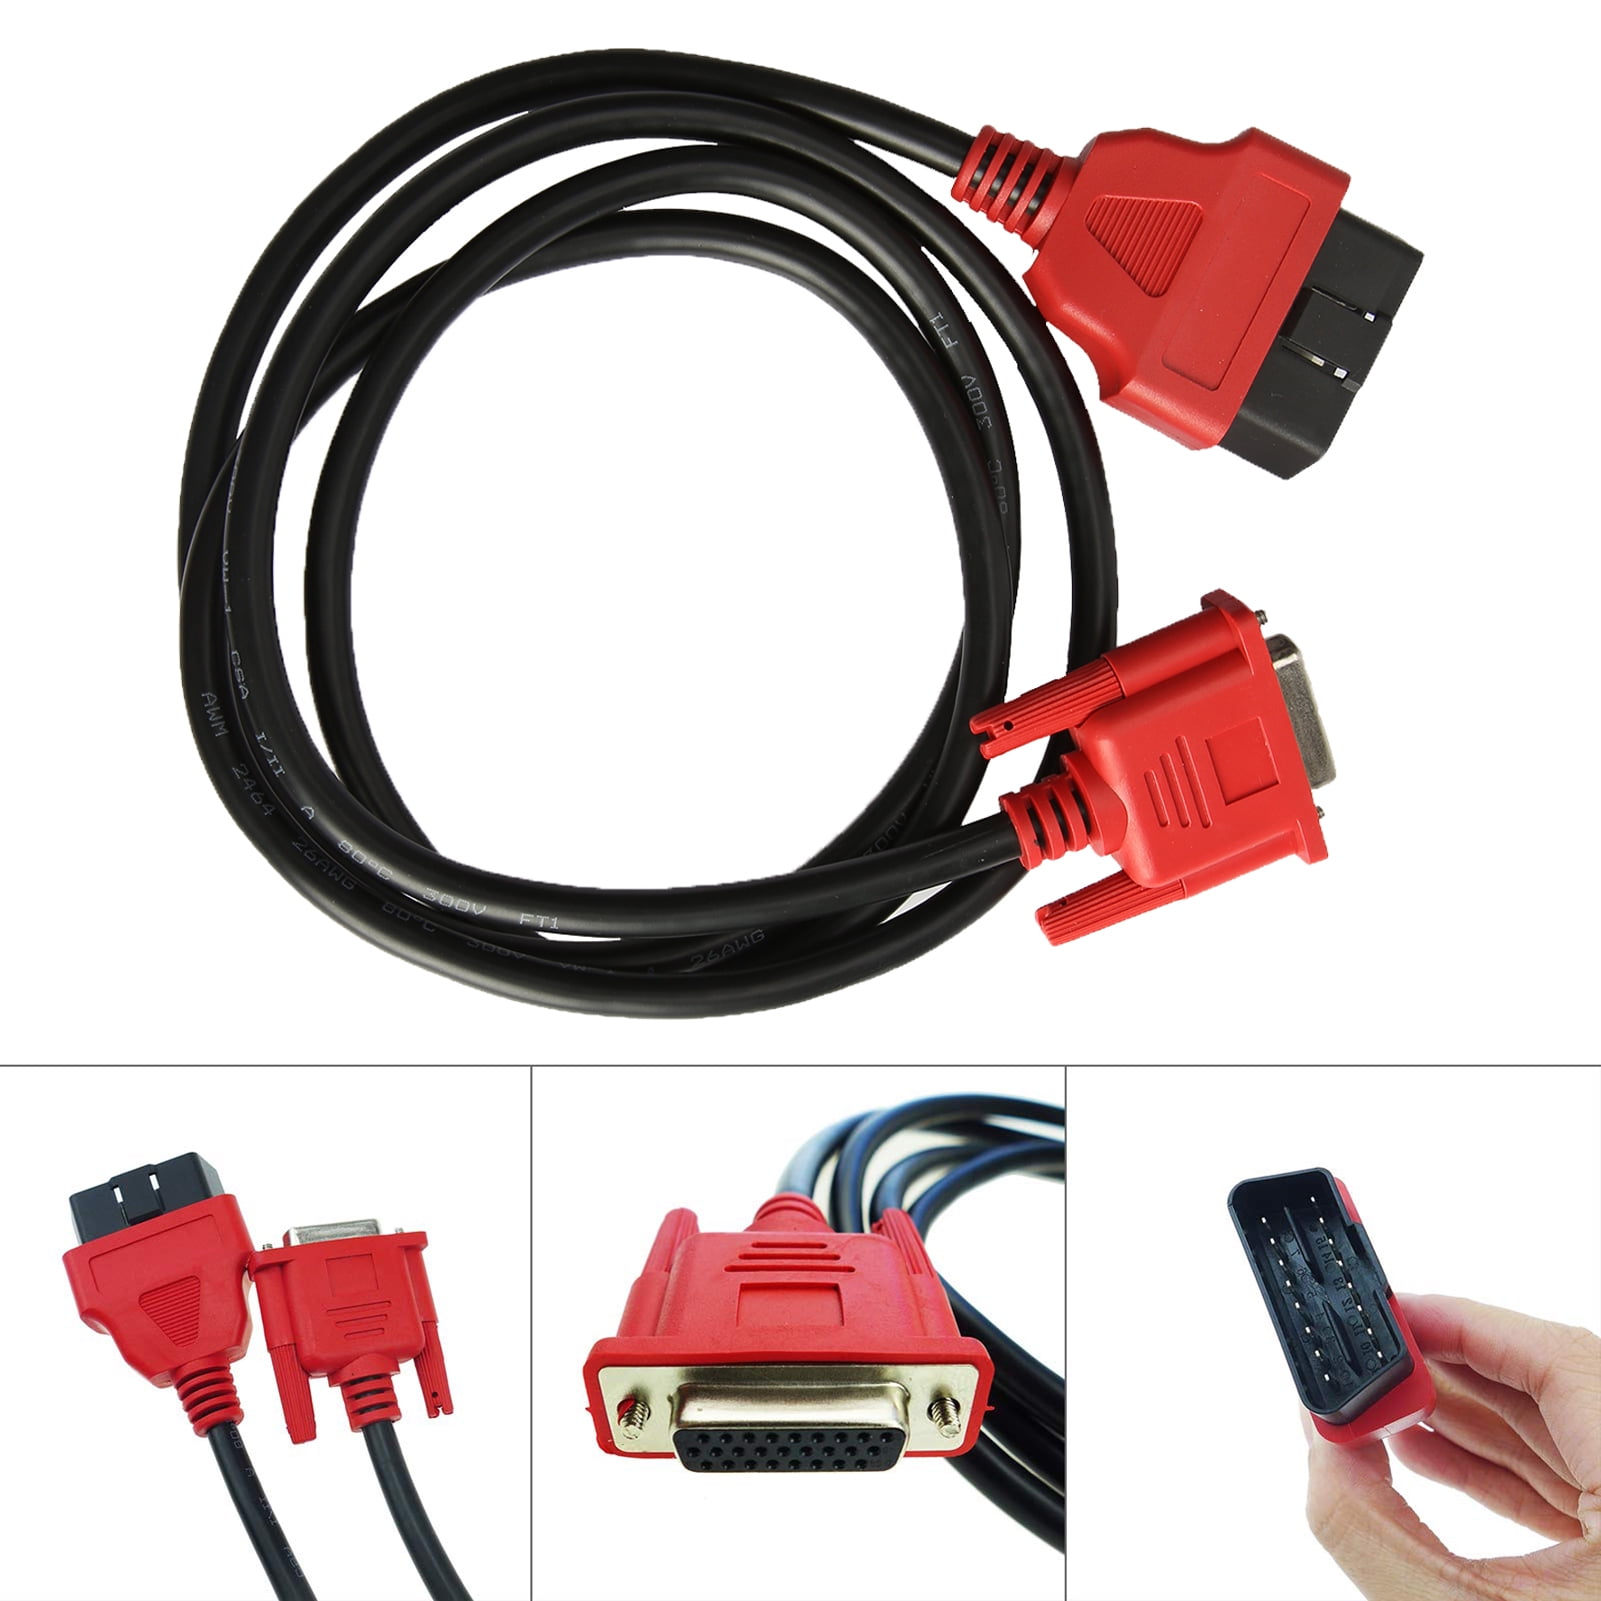 Details about   OBDII OBD2 Cable Compatible with Snap on DA-4 for VERUS WIRELESS Scanner EEMS325 